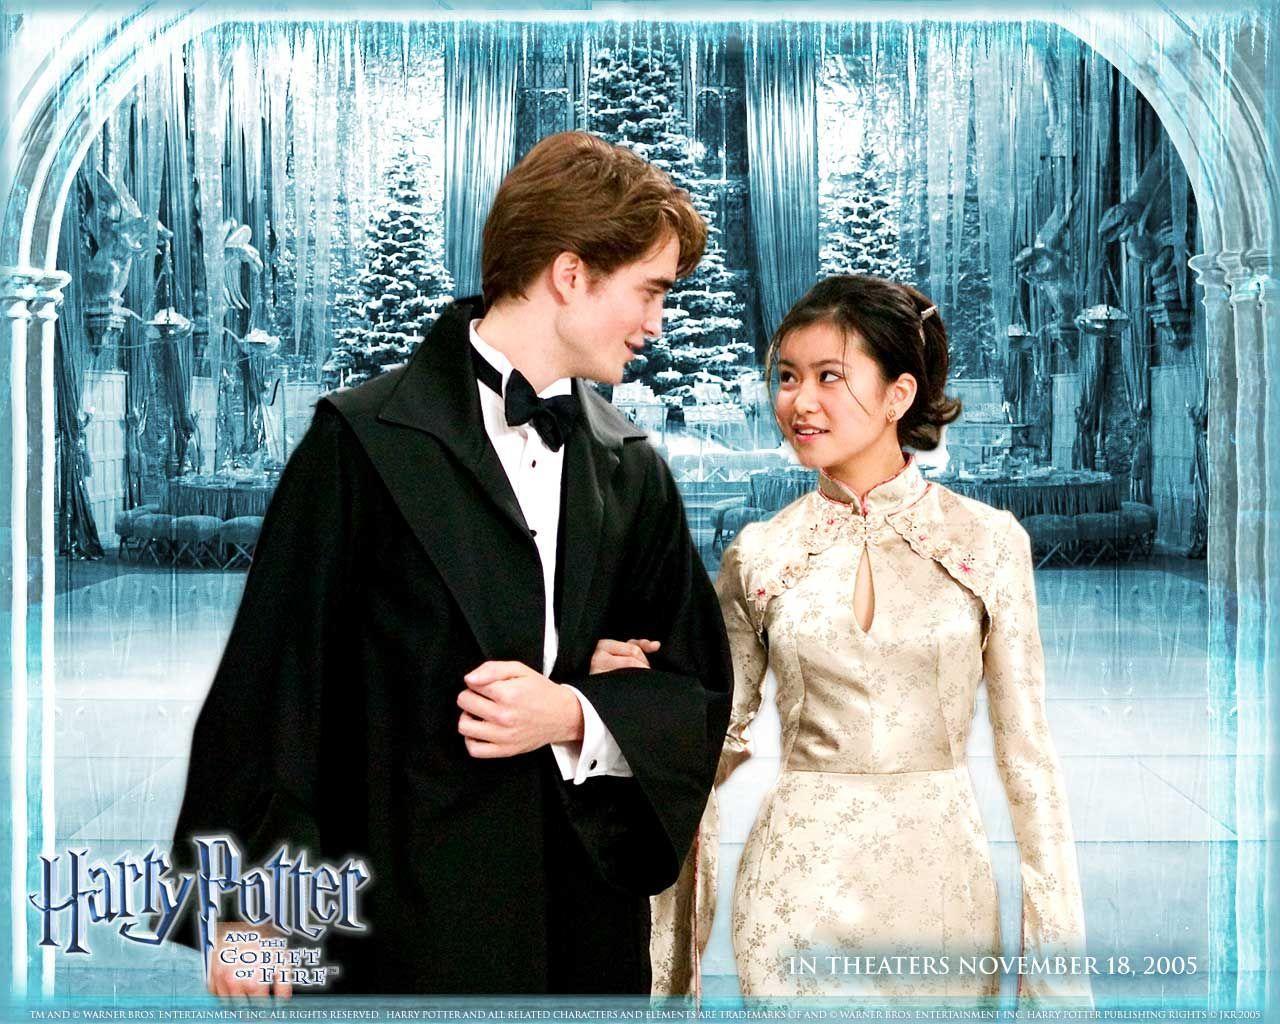 Cedric Diggory and Cho Chang at the Yule Ball. The Chosen One